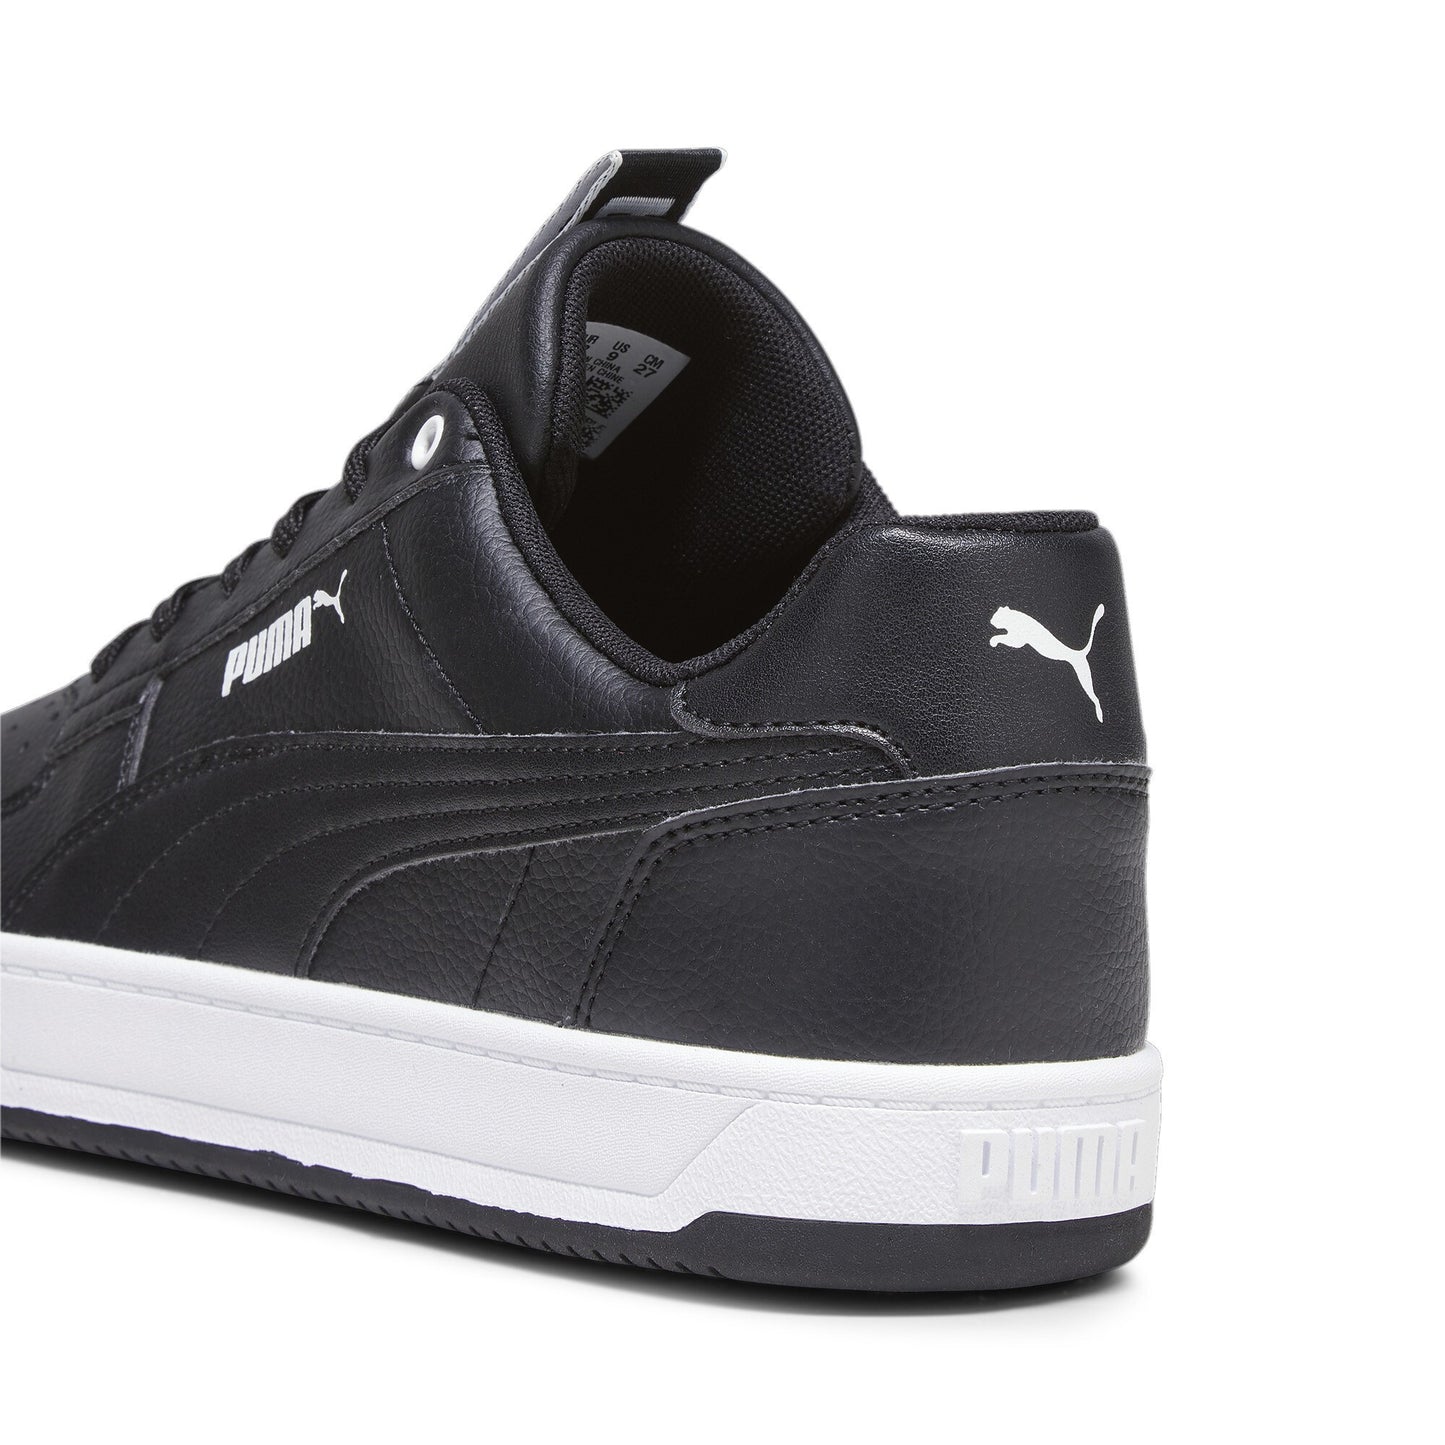 Puma - Sneakers Caven 2.0 Logobsession